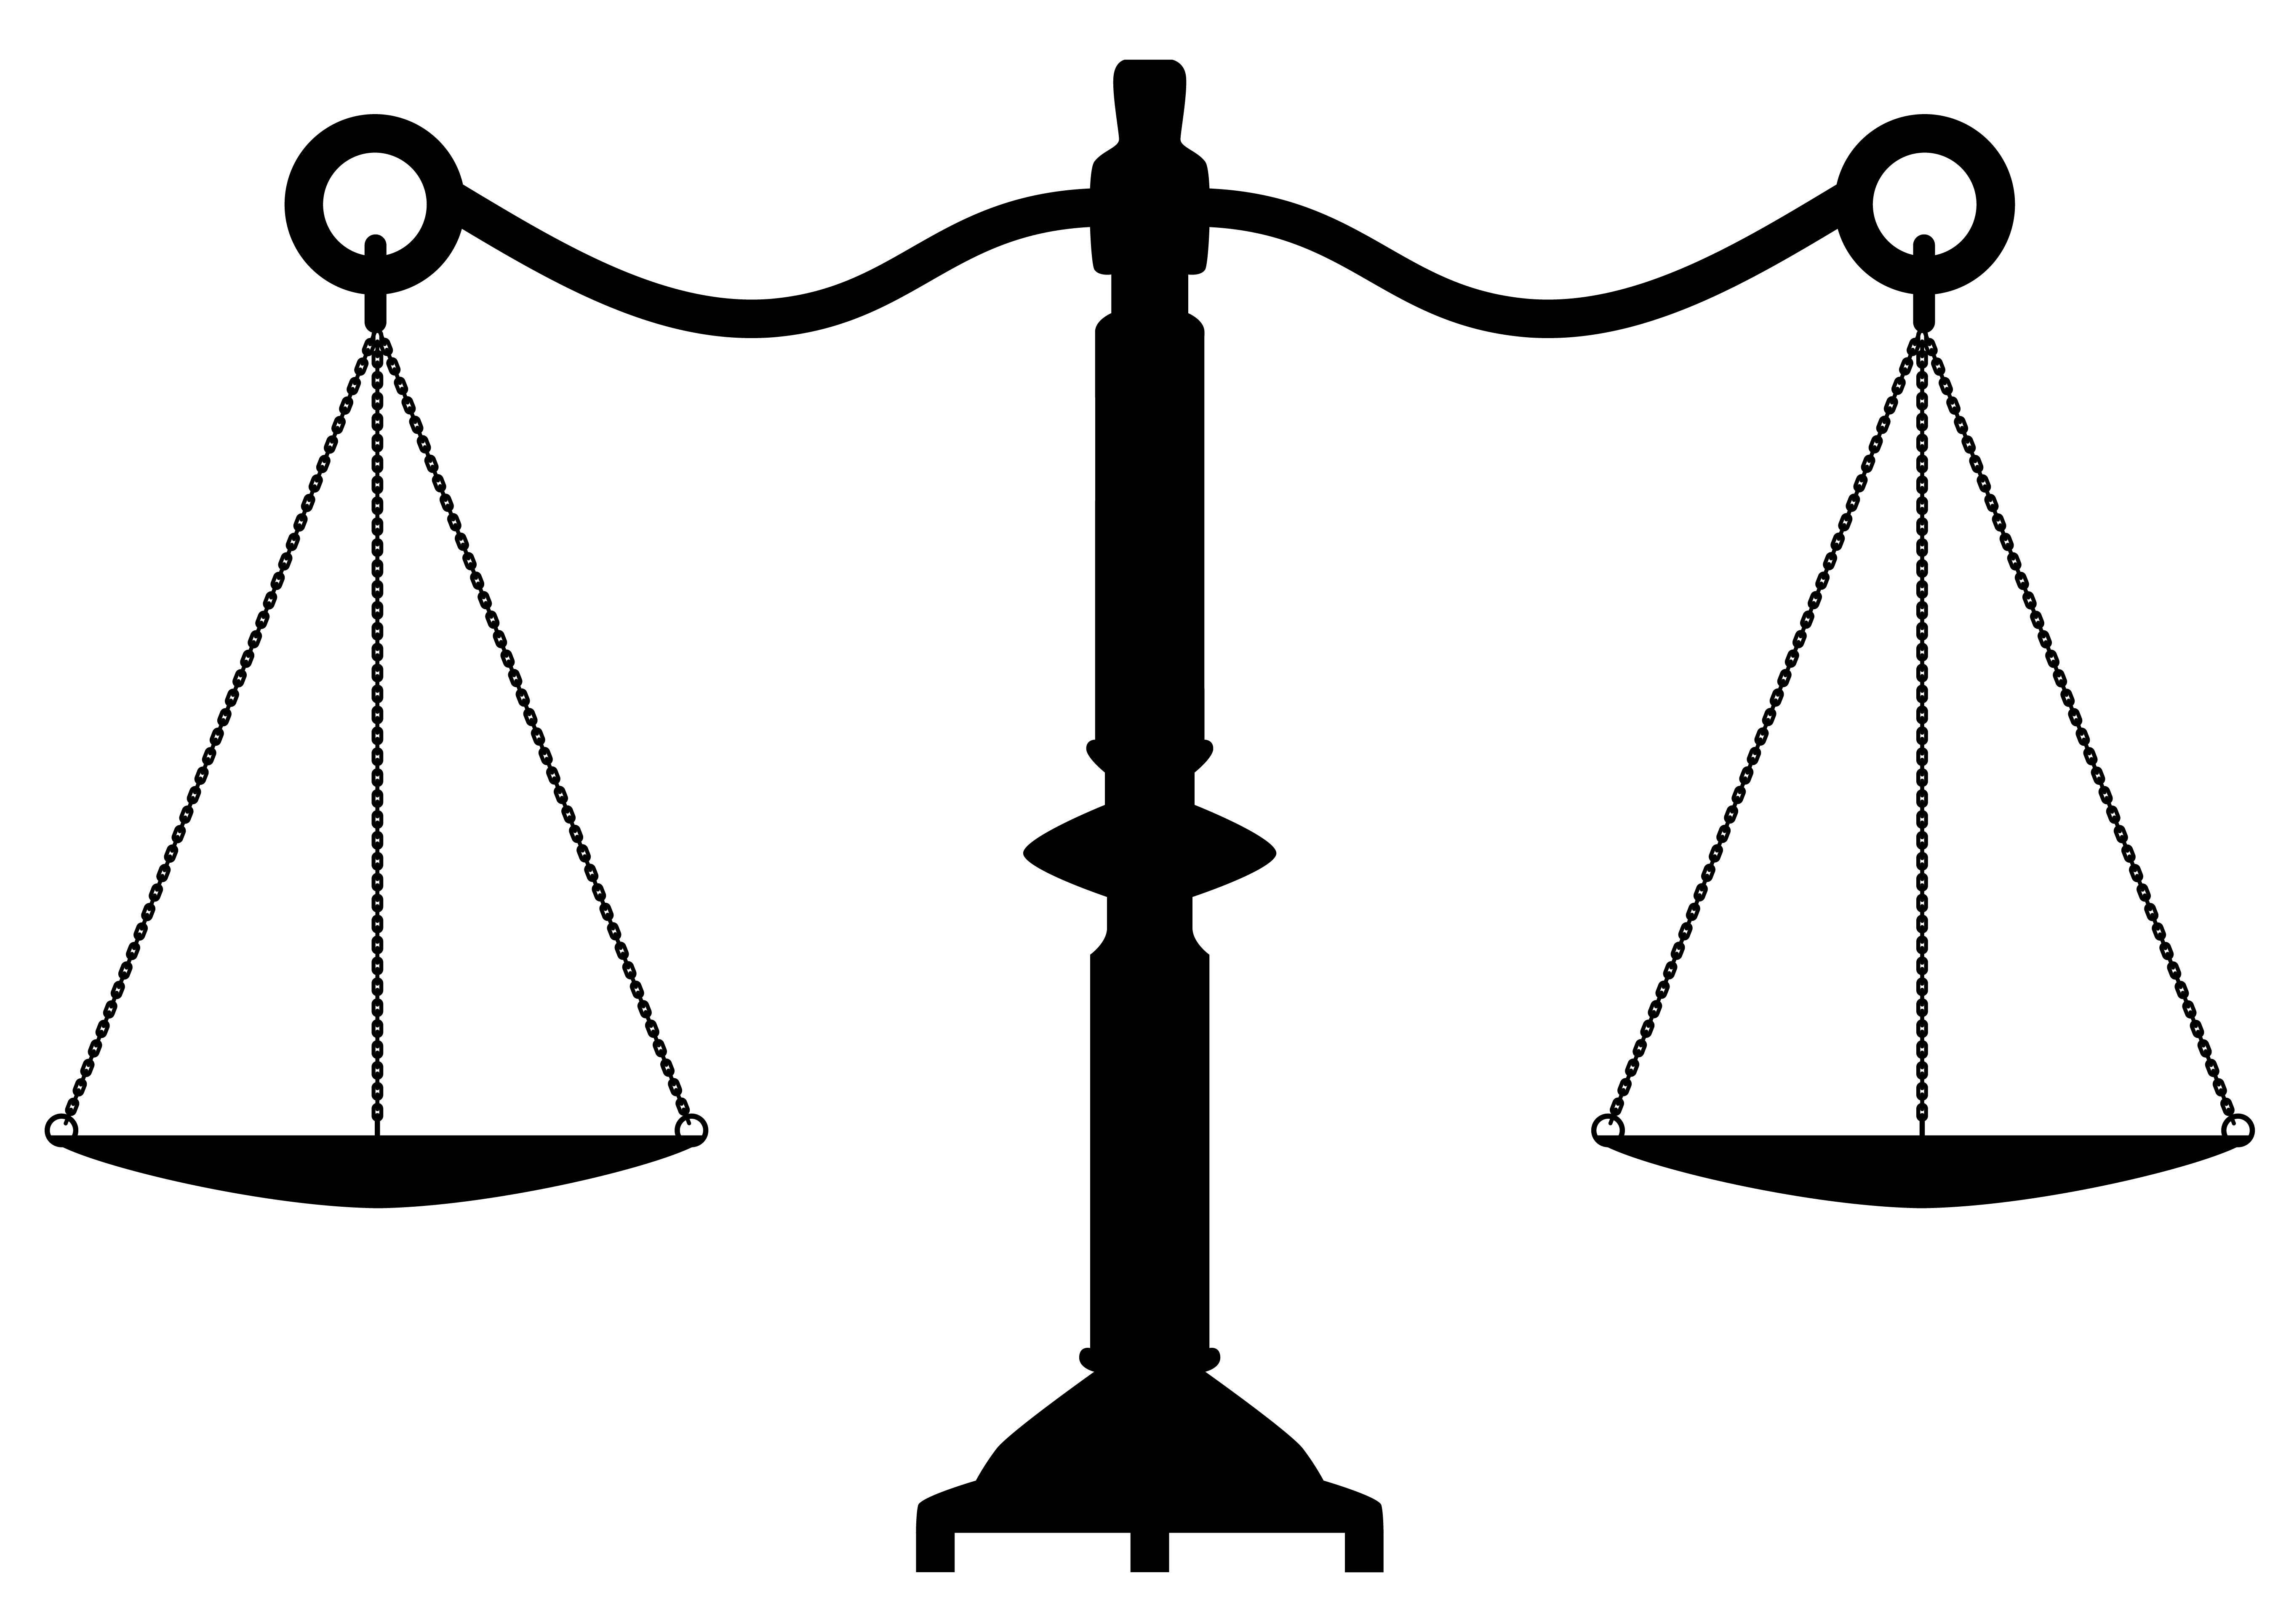 Images Scales Of Justice - Clipart library